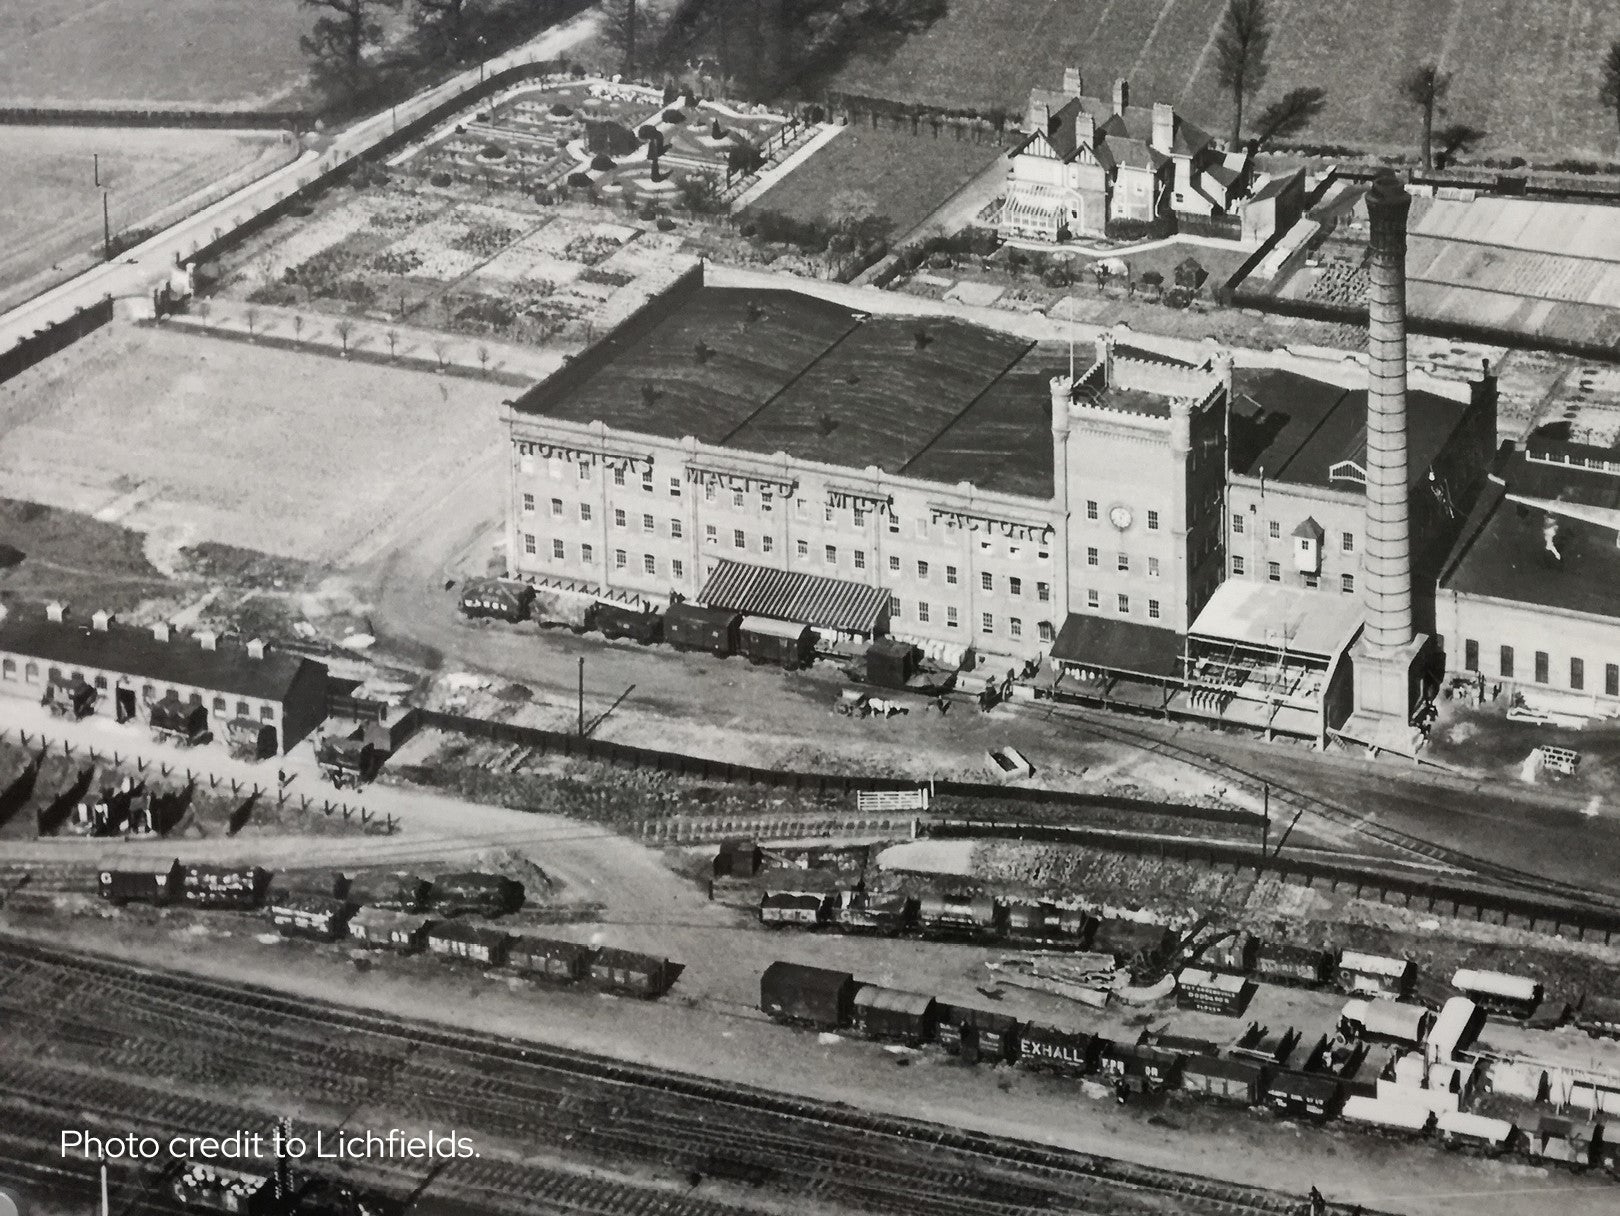 Horlicks Quarter - archive image of the factory